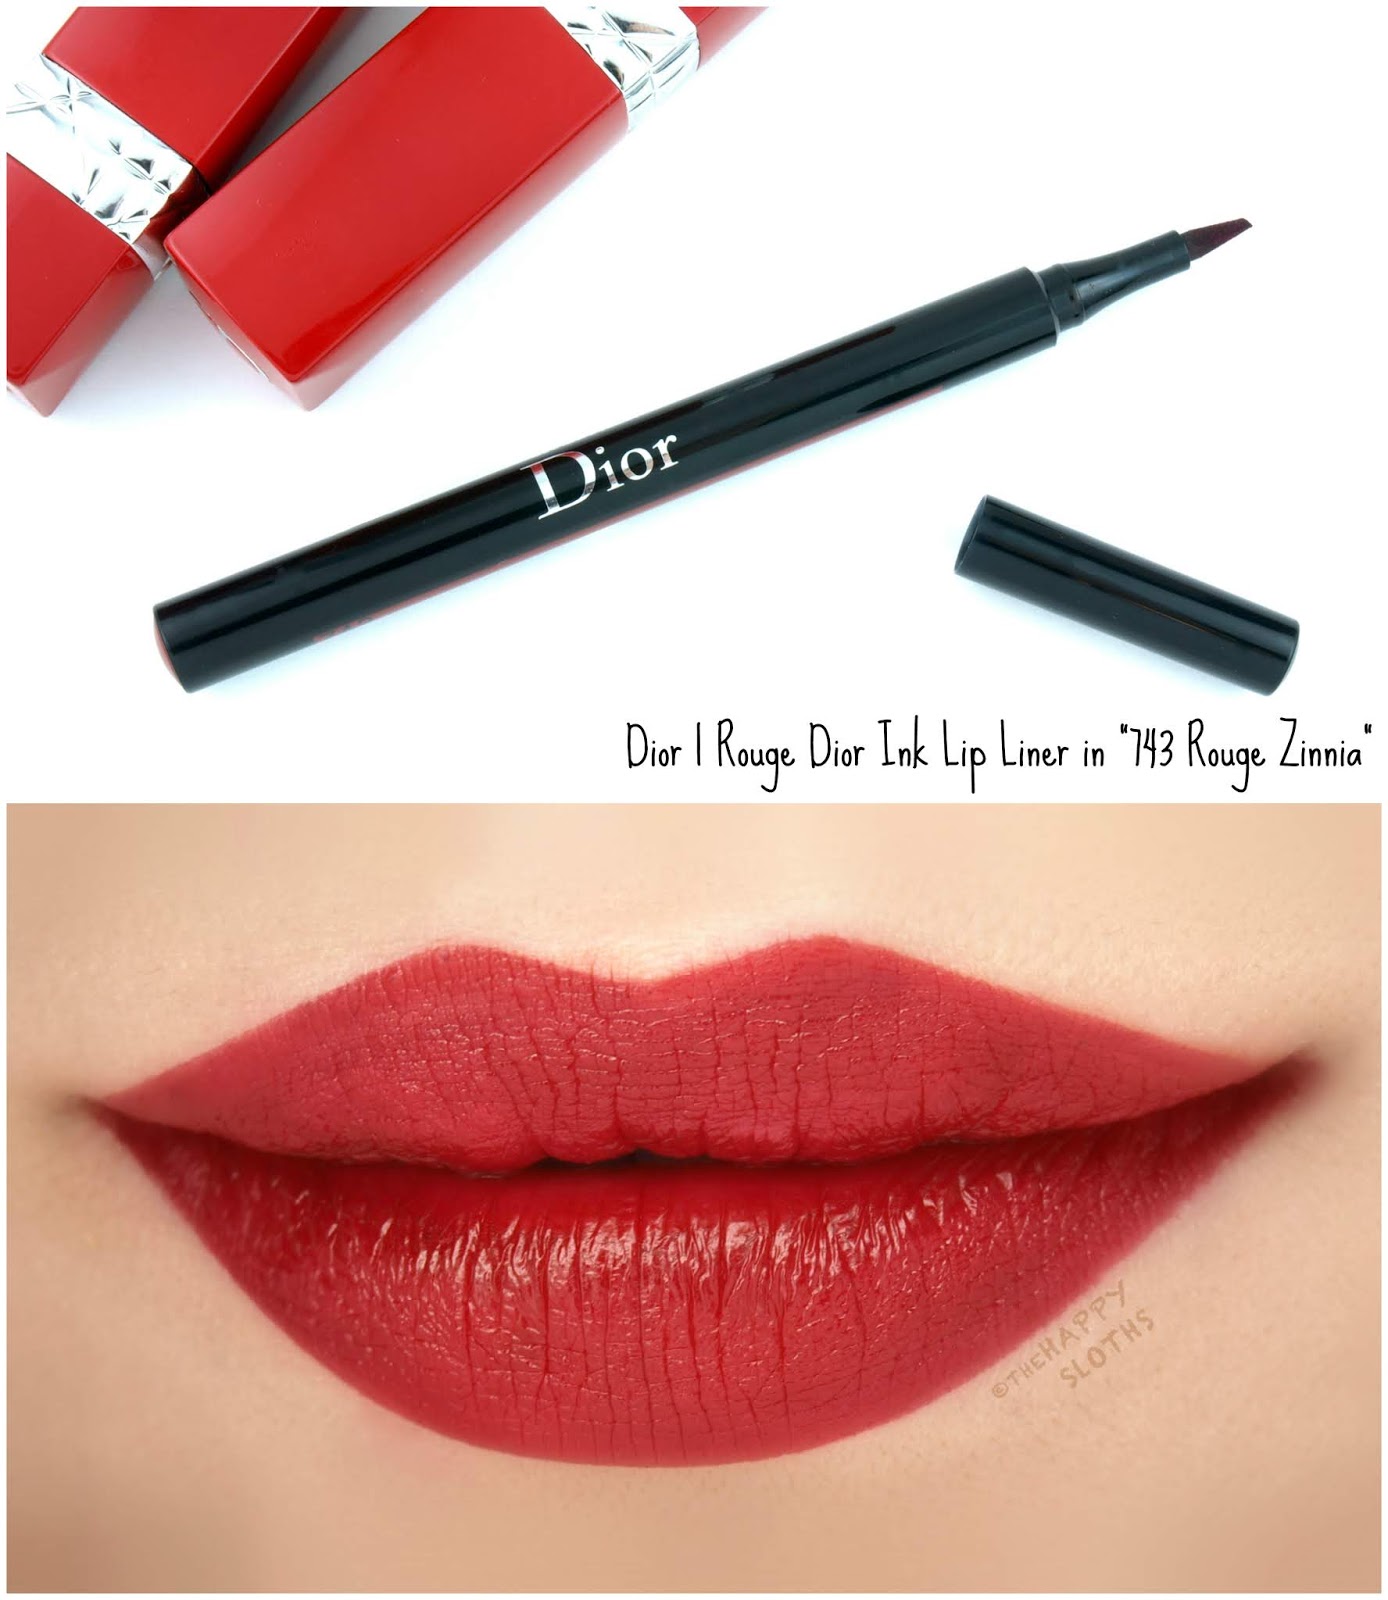 Dior | Rouge Dior Ink Lip Liner in "743 Rouge Zinnia": Review and Swatches